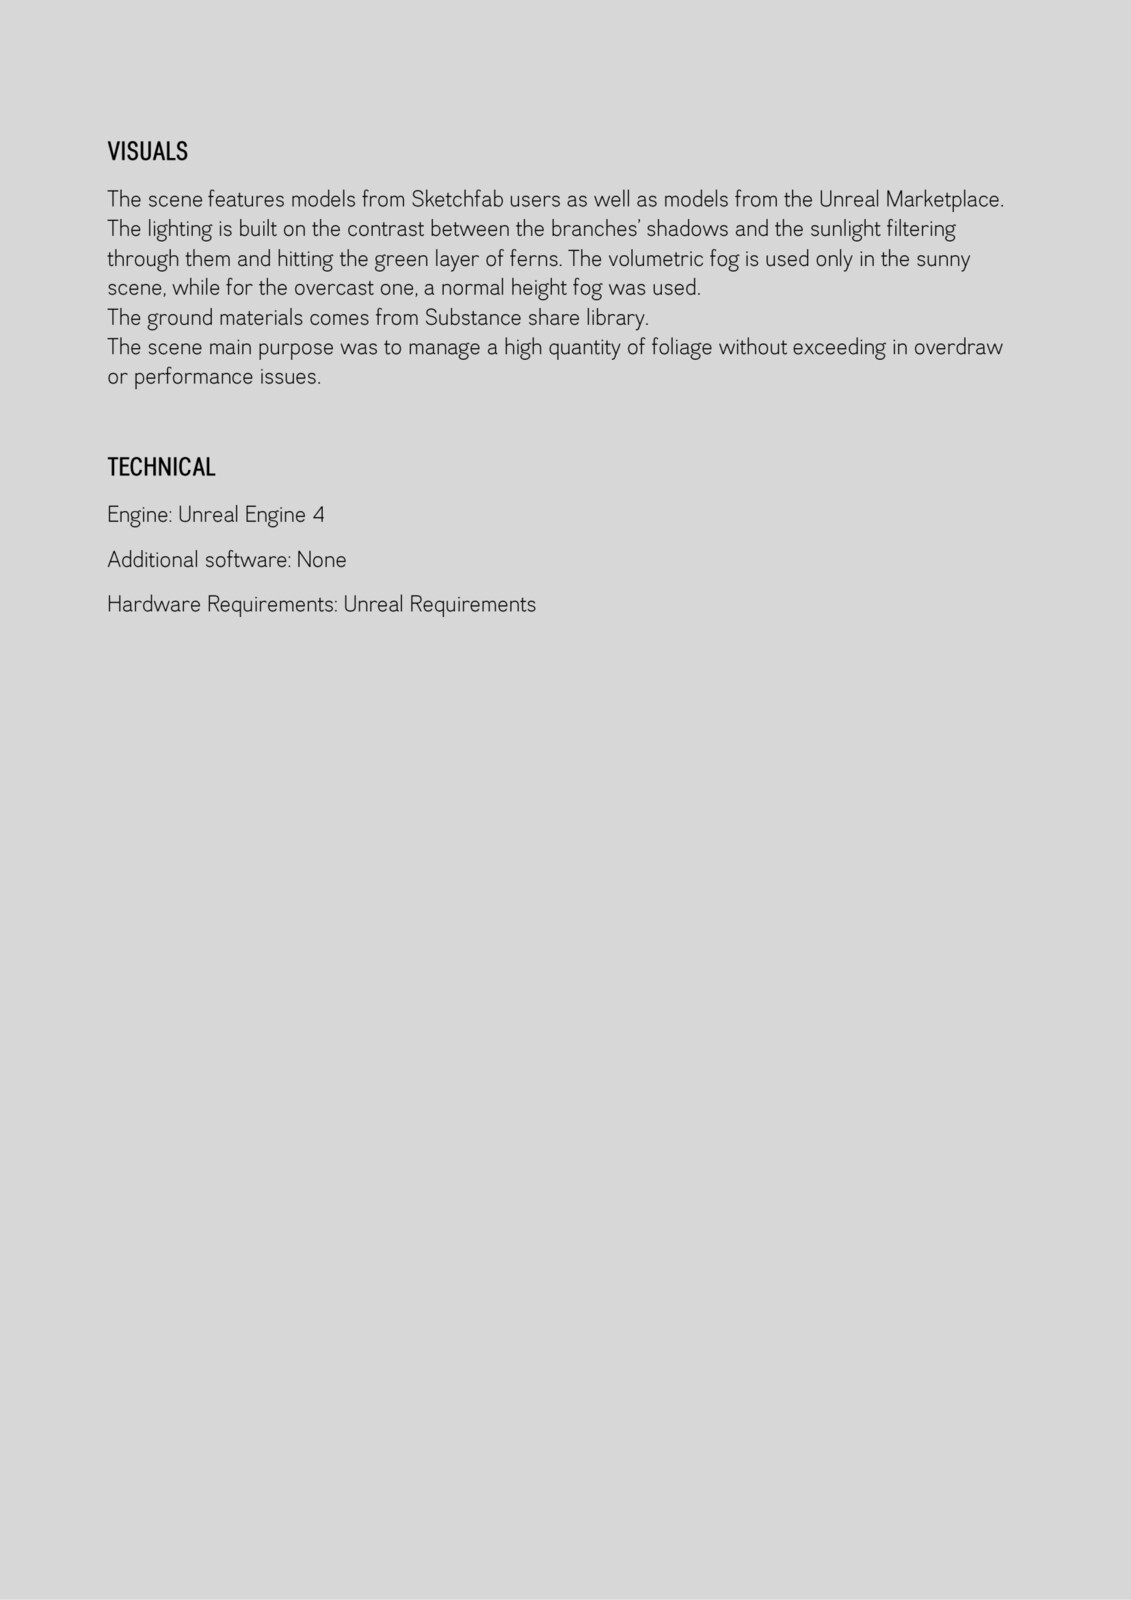 ENVIRONMENT DESIGN DOCUMENT PAGE 5